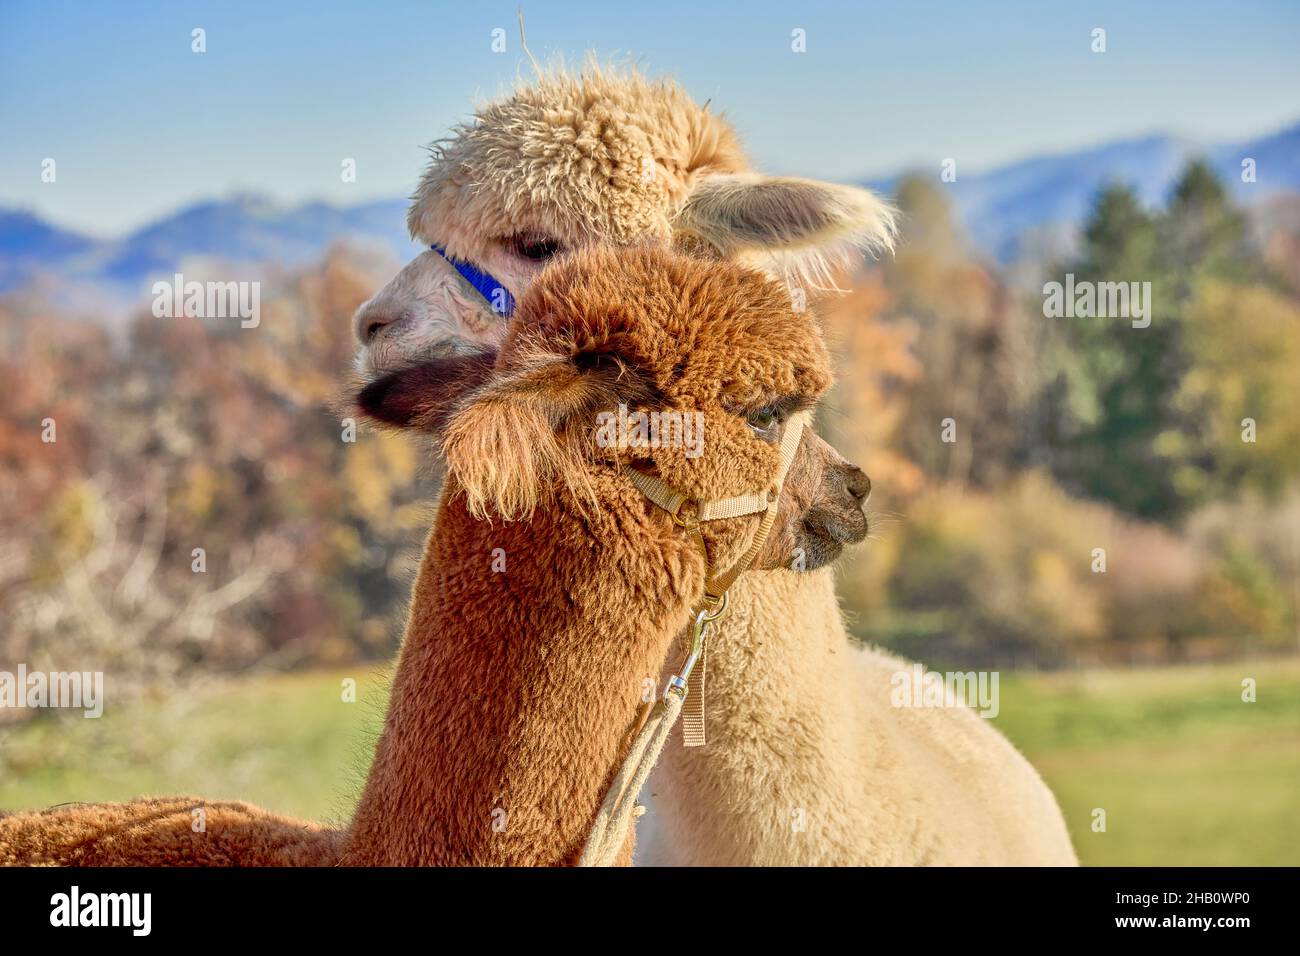 2 Two Fluffy Alpacas, Beige And Brown, Look Attentively In Opposite Directions. Blurred Background With Trees Hills And Blue Sky. Bauma Zurich Oberlan Stock Photo